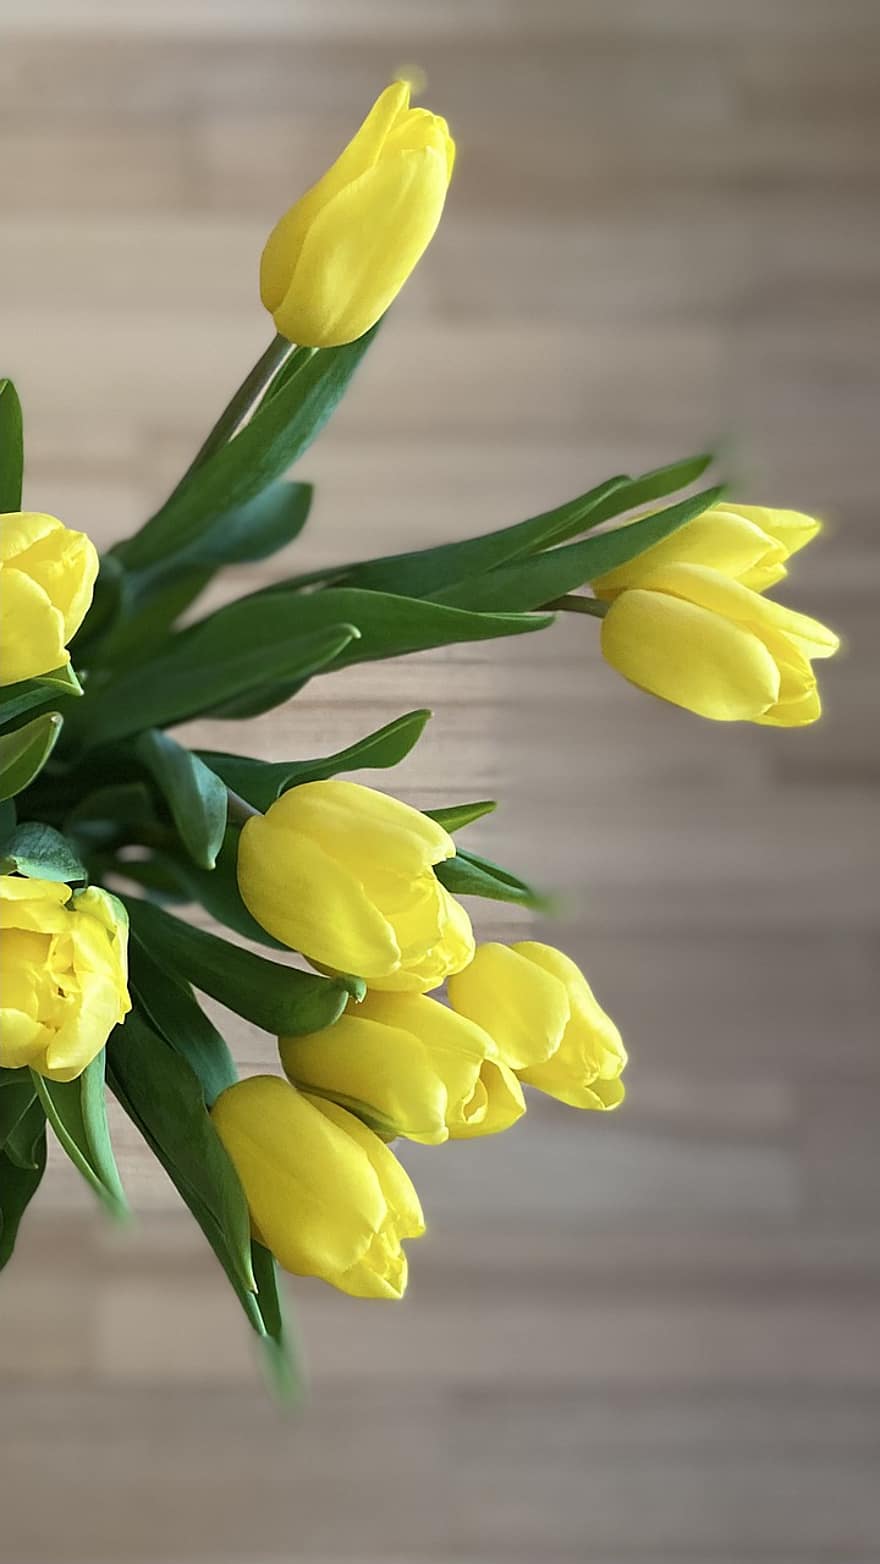 Flowers, Tulips, Bouquet, Yellow, Spring, Plant, Bloom, Blossom, tulip, flower, freshness